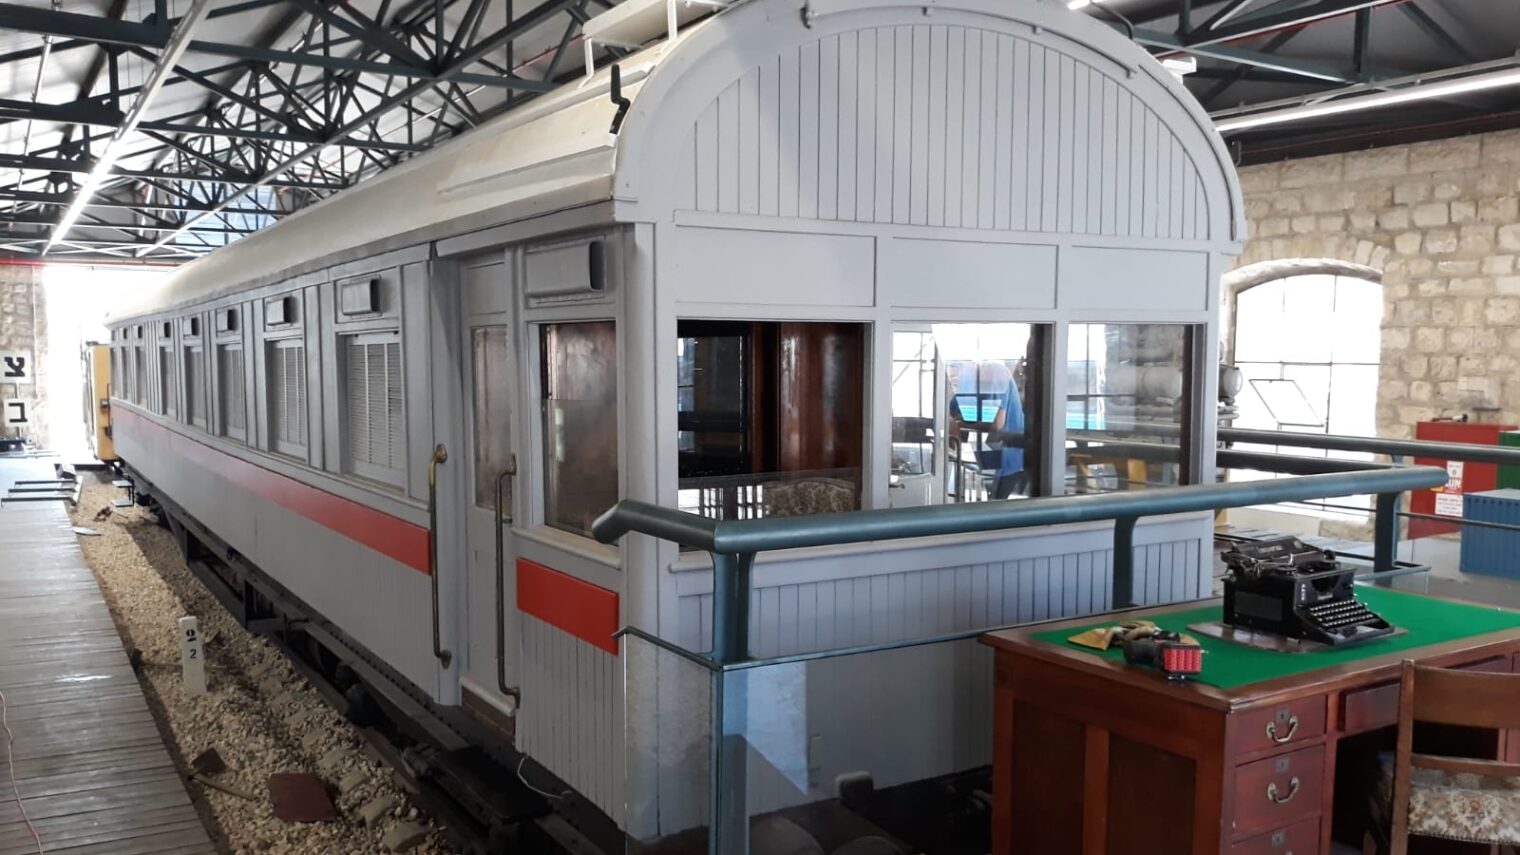 The restored Car 98. For five decades, the luxury saloon carriage traveled throughout the Middle East carrying dignitaries. Photo courtesy of Israel Railways Museum